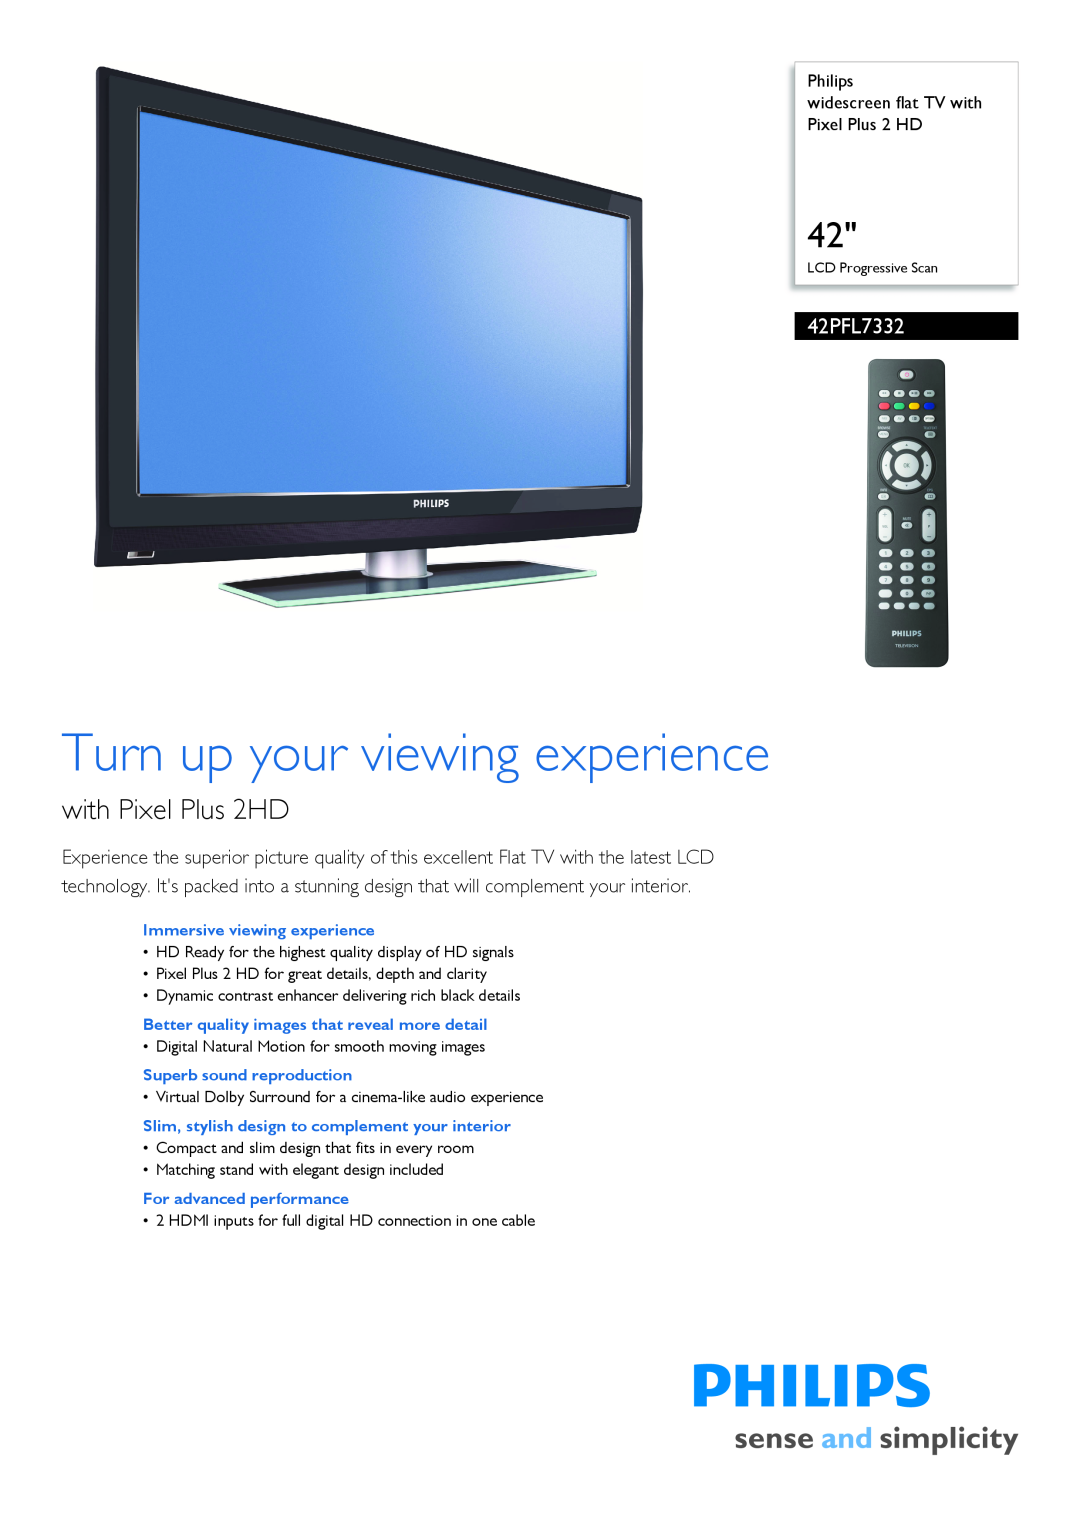 Philips 42PFL7332 manual Philips widescreen flat TV with Pixel Plus 2 HD, Immersive viewing experience 